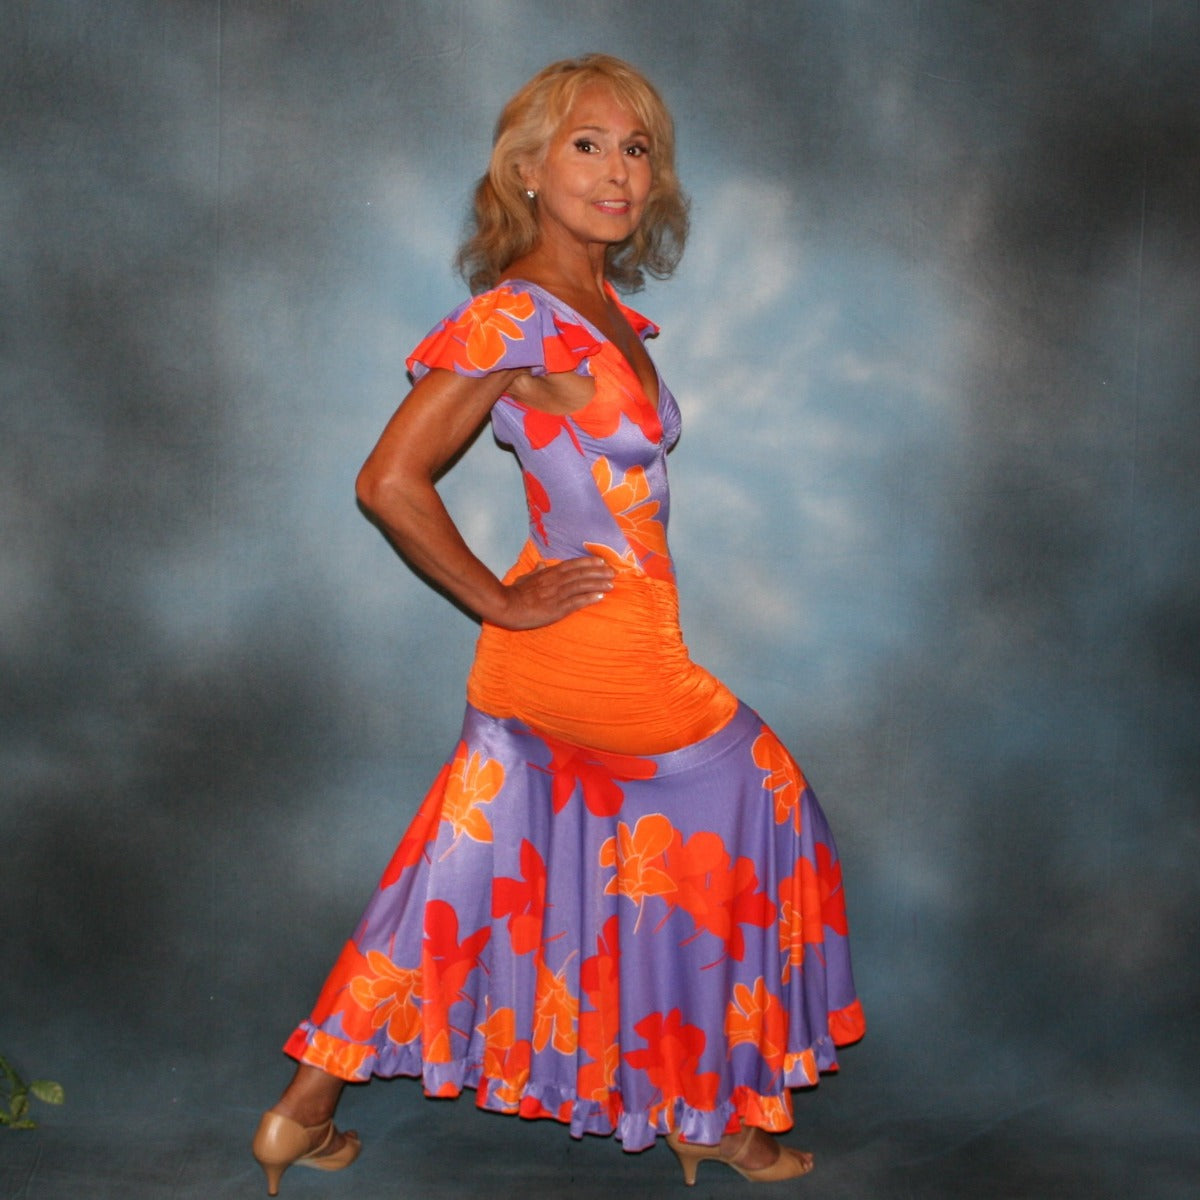 Tropical print social ballroom dress created in lycra of deep orchid tropical print with purple flowers, features ruffly cap sleeves & ruffle on full circle skirt. The bodysuit is built right into the dress, so it makes a great & fun dress for teaching, especially if you work on theater arts! The look is finished with an orange ruched hip sash.